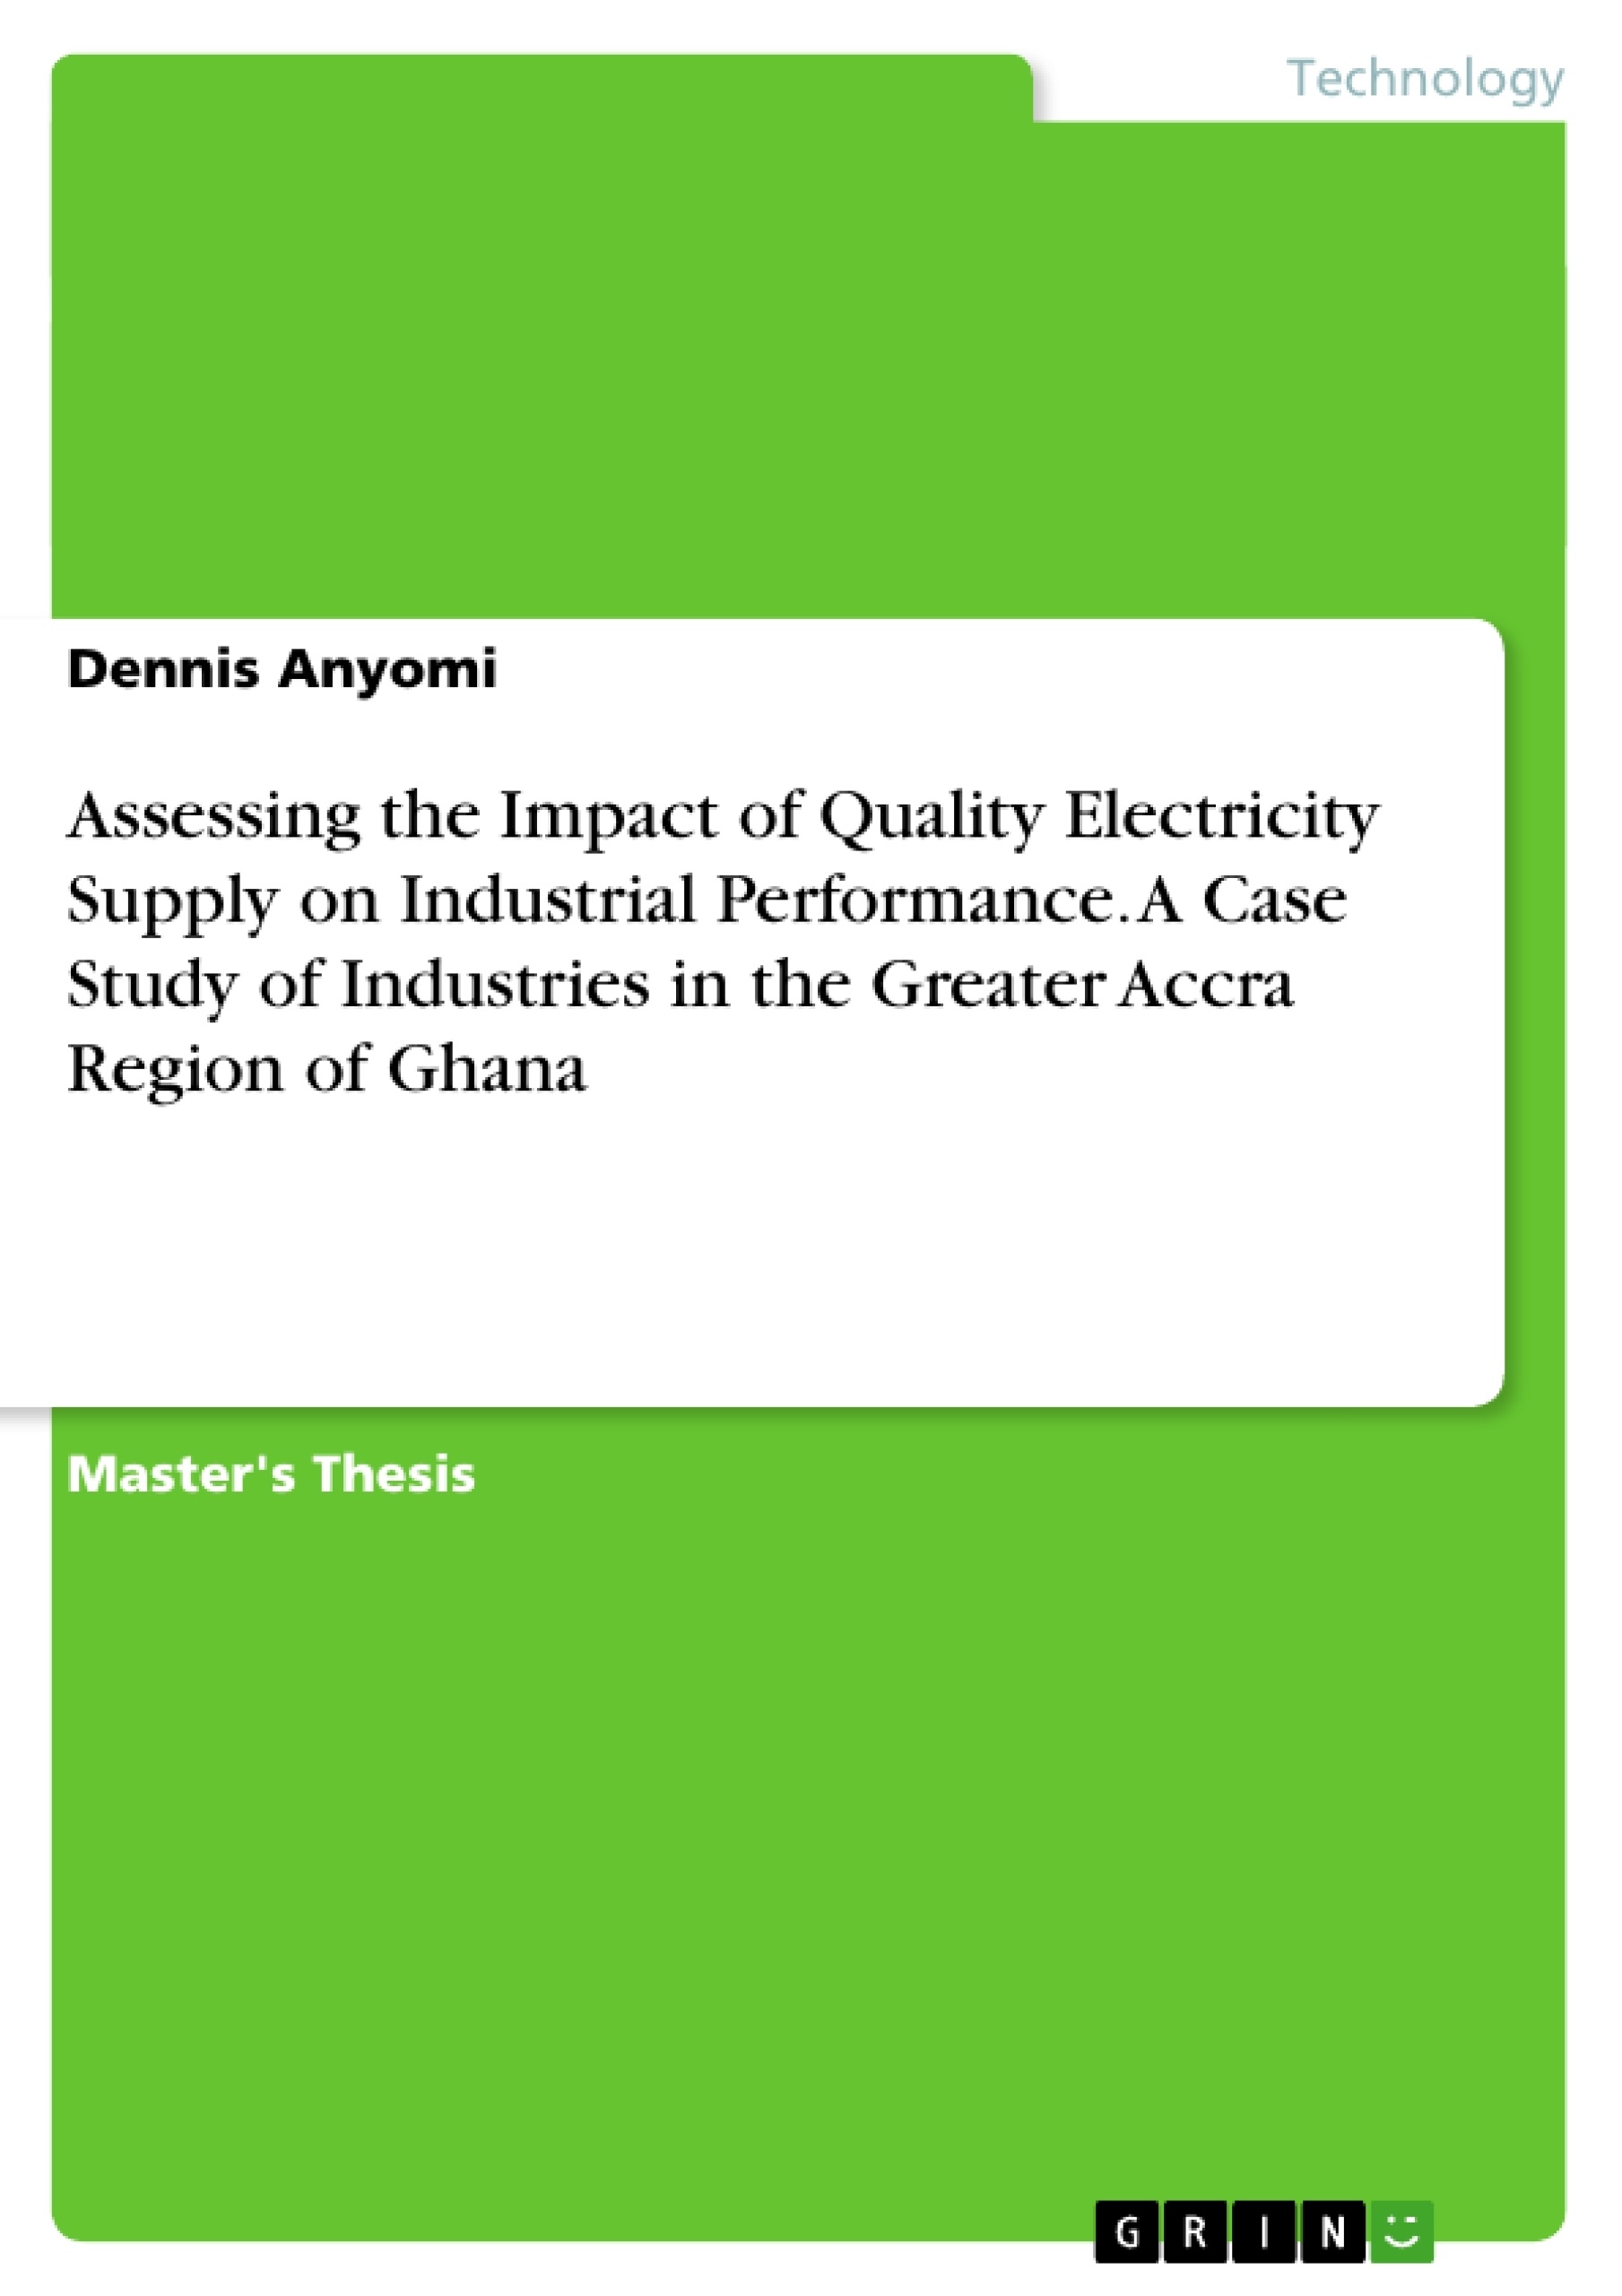 Titre: Assessing the Impact of Quality Electricity Supply on Industrial Performance. A Case Study of Industries in the Greater Accra Region of Ghana